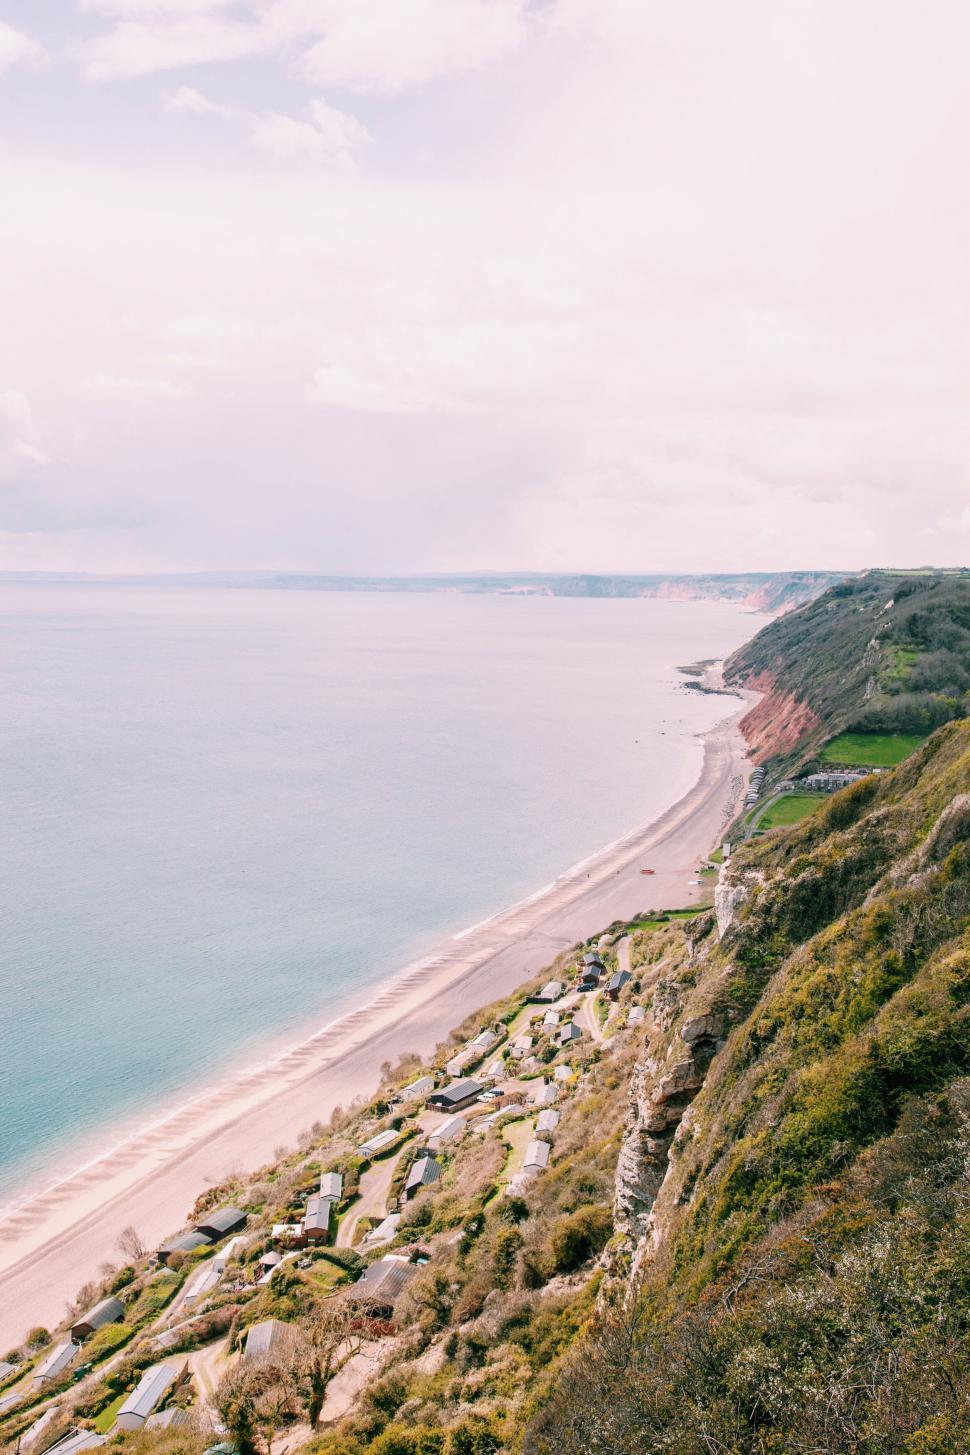 Free Image of Coastal cliffside with caravans and sea view 